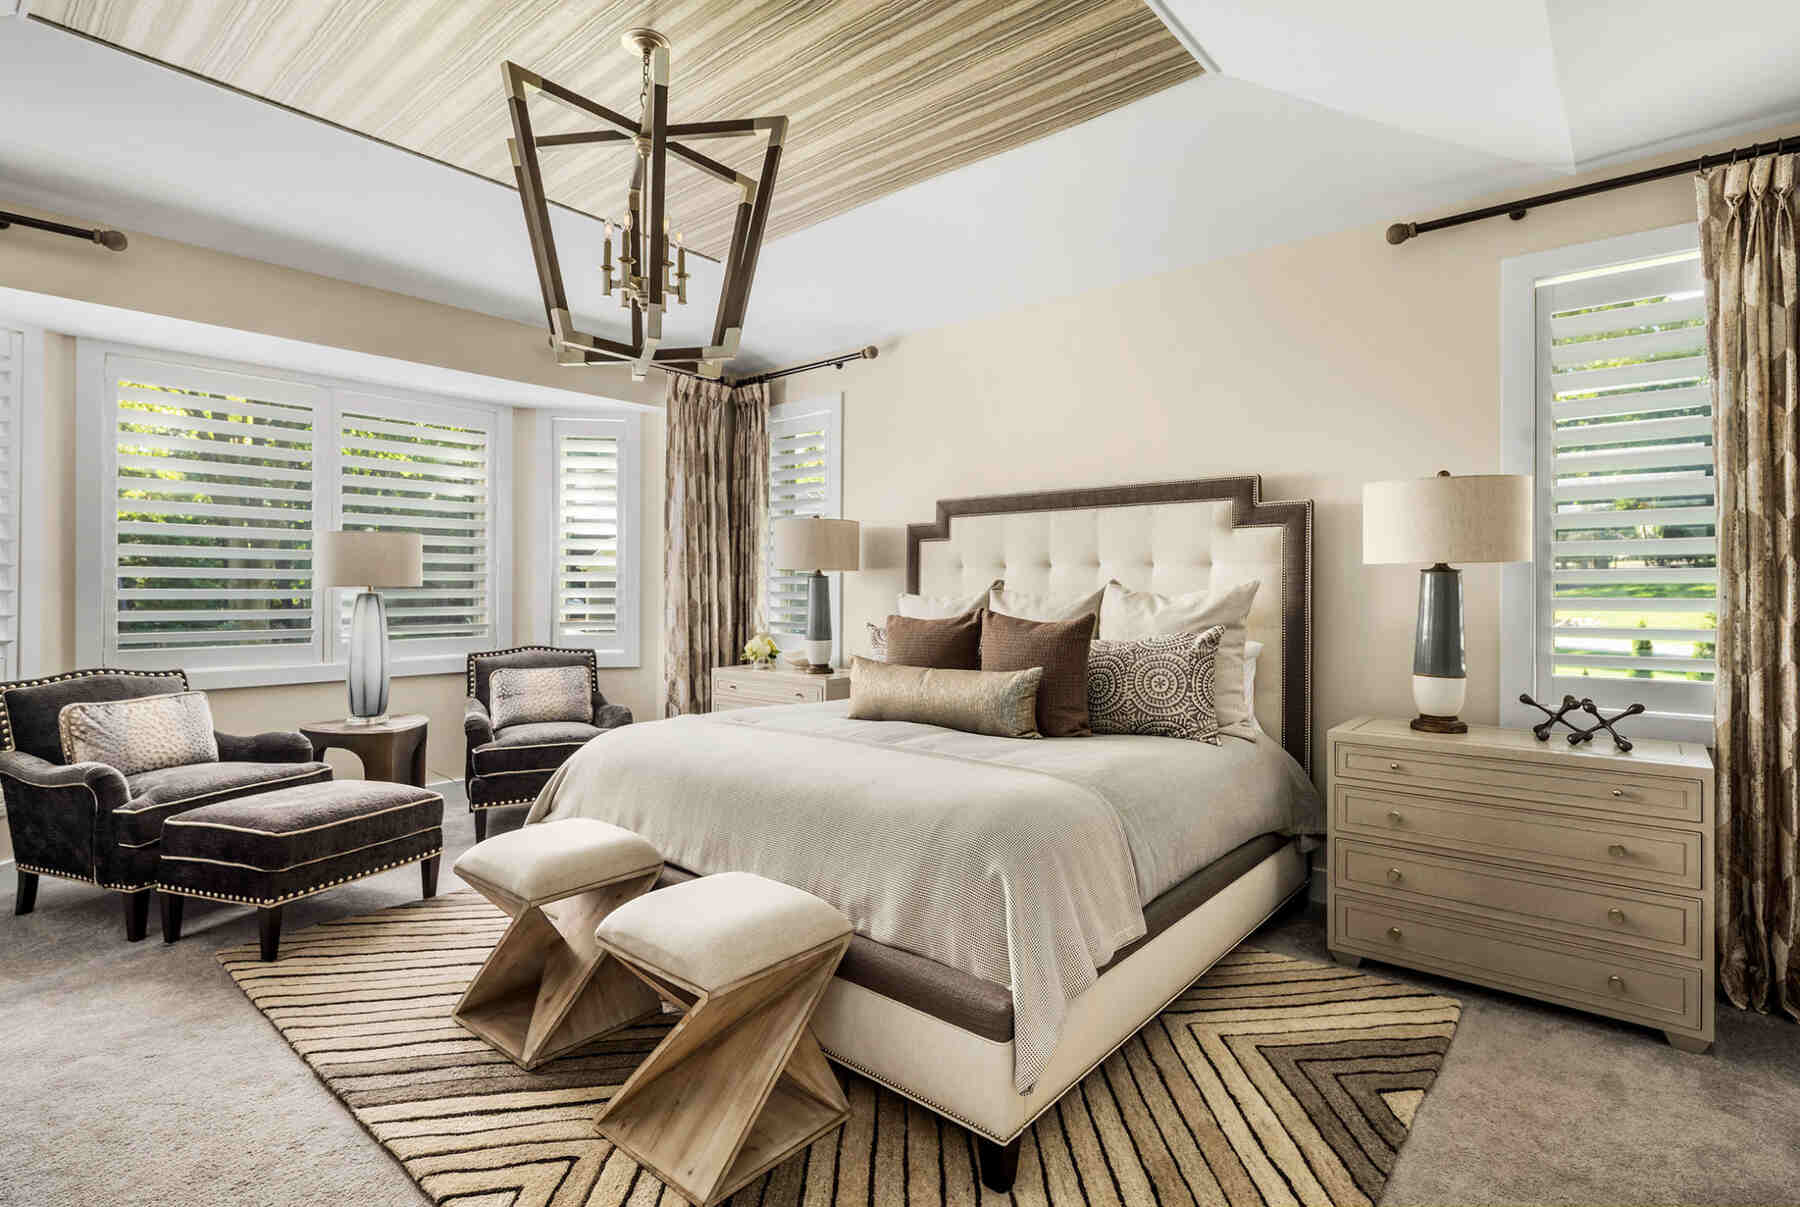 A bedroom with earthy tones